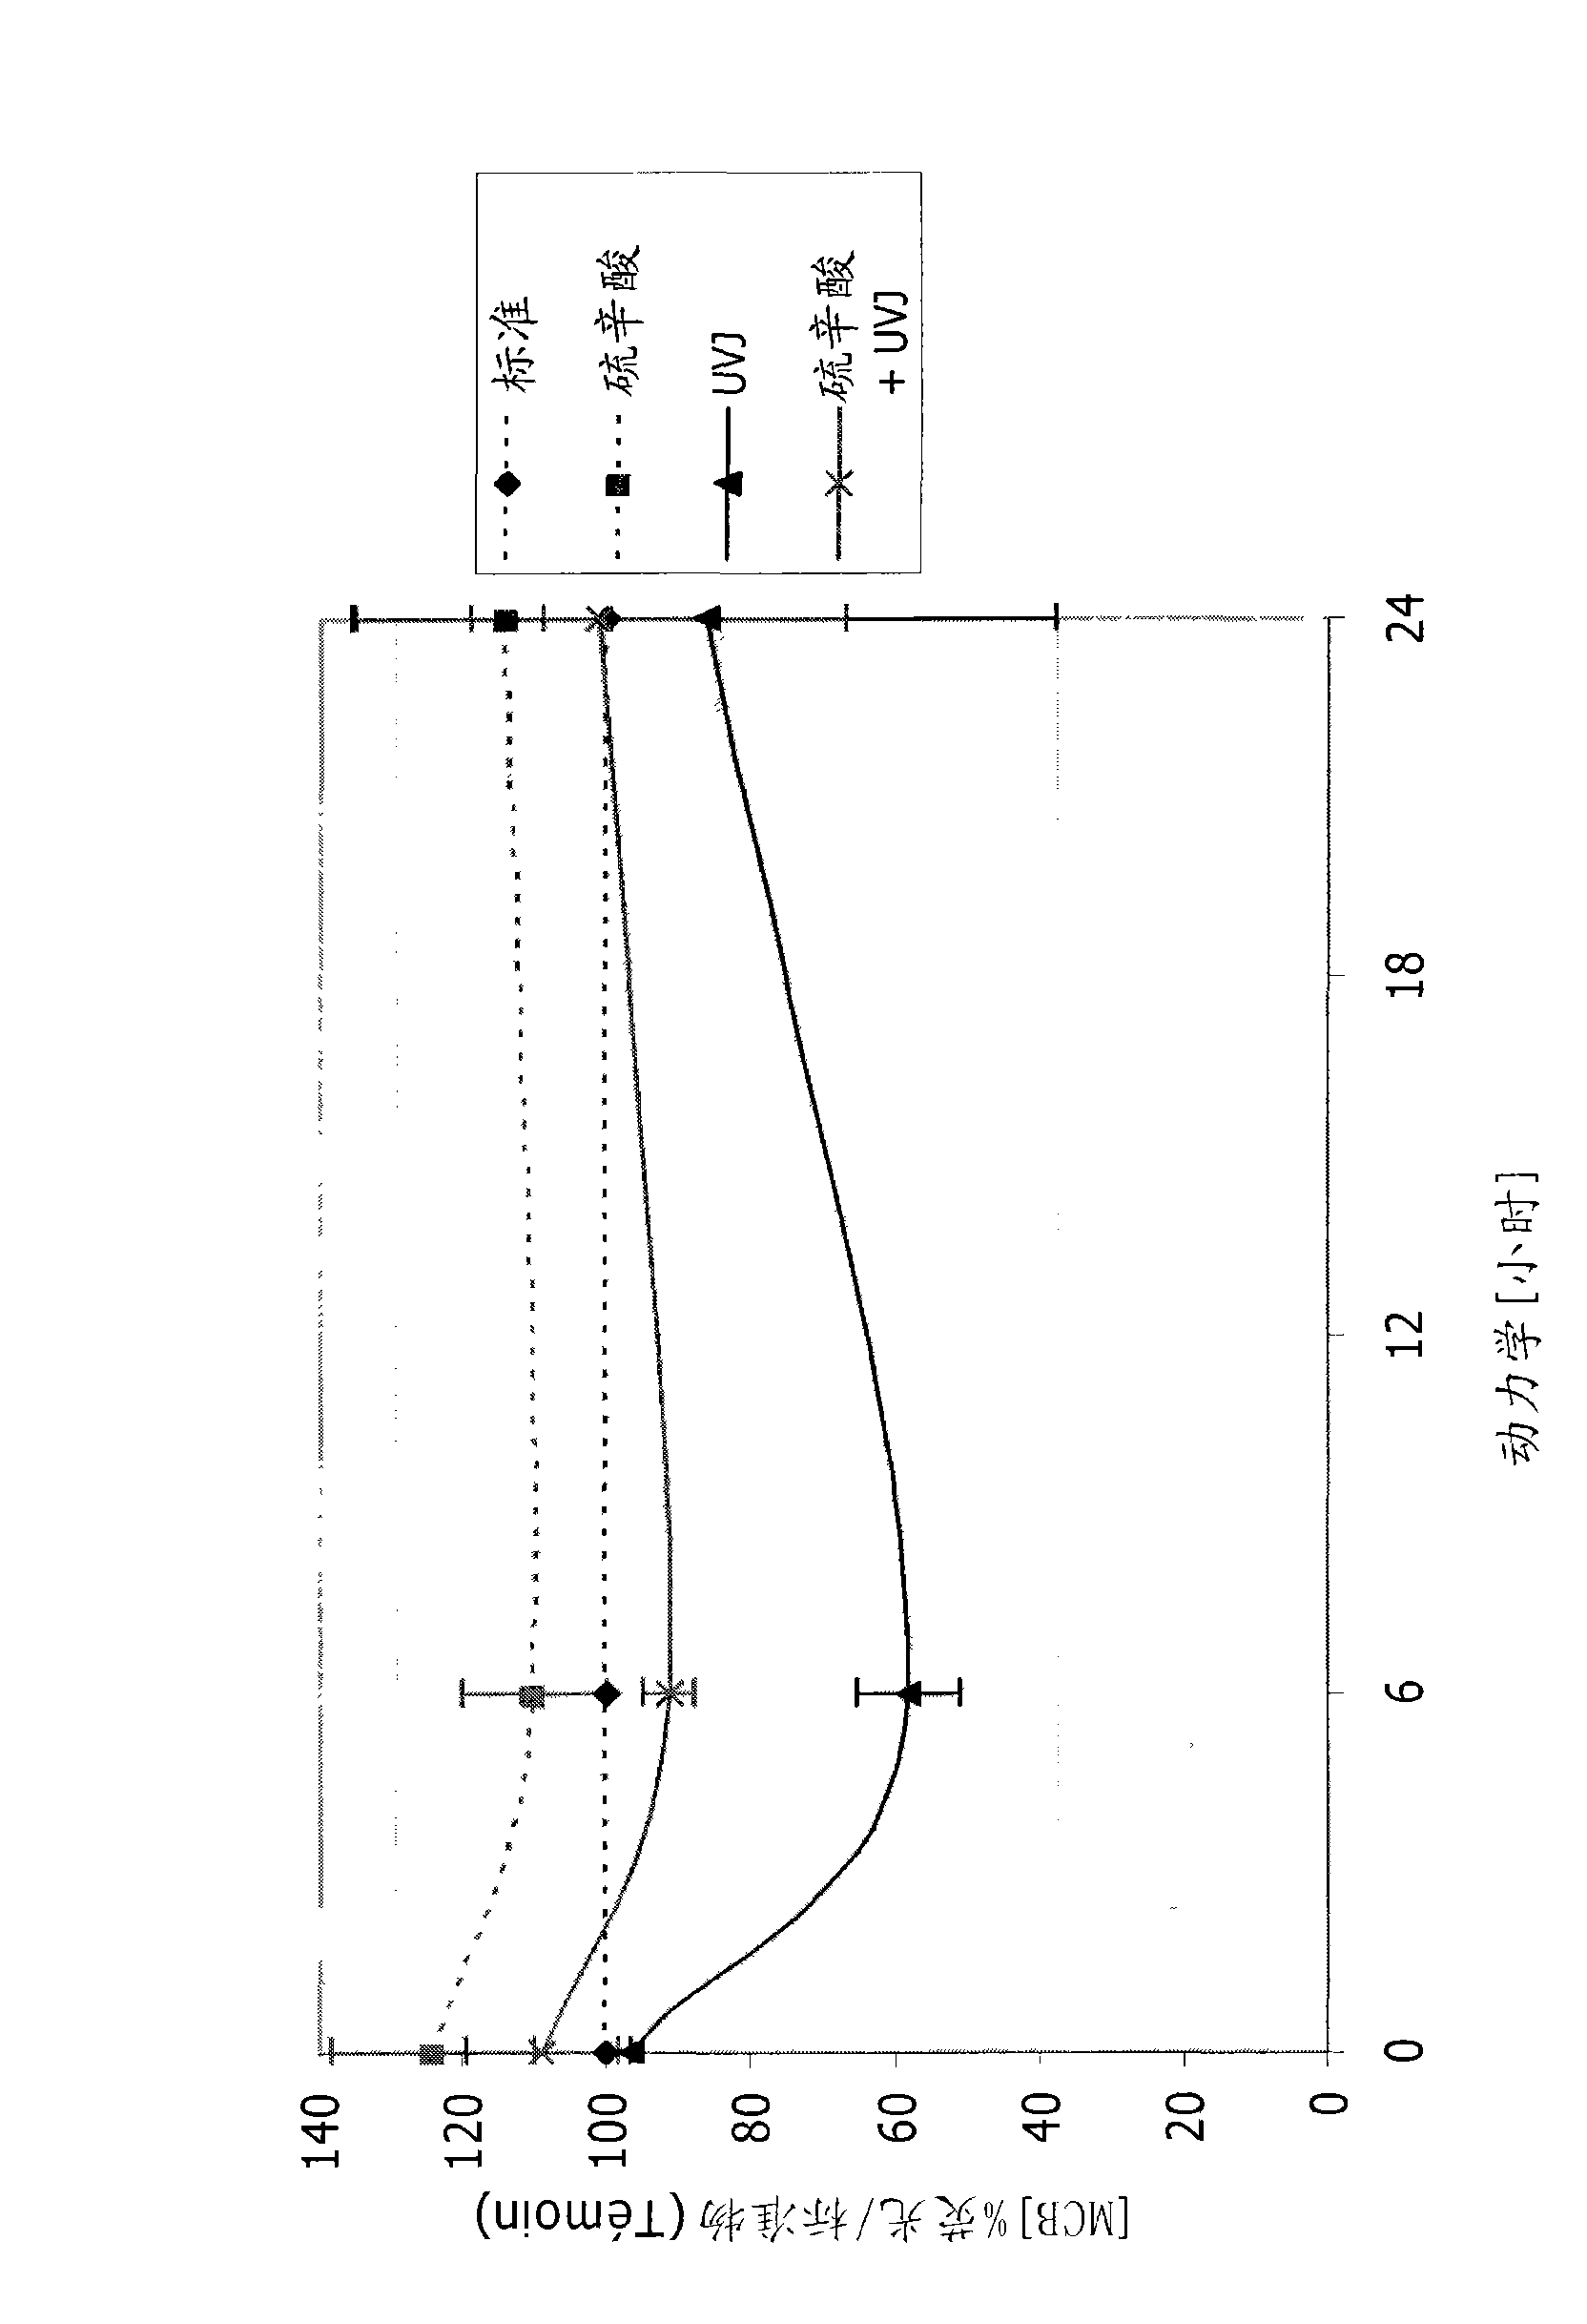 Uses of dithiolane compounds for the photoprotection of the skin, dithiolane compounds and compositions containing same